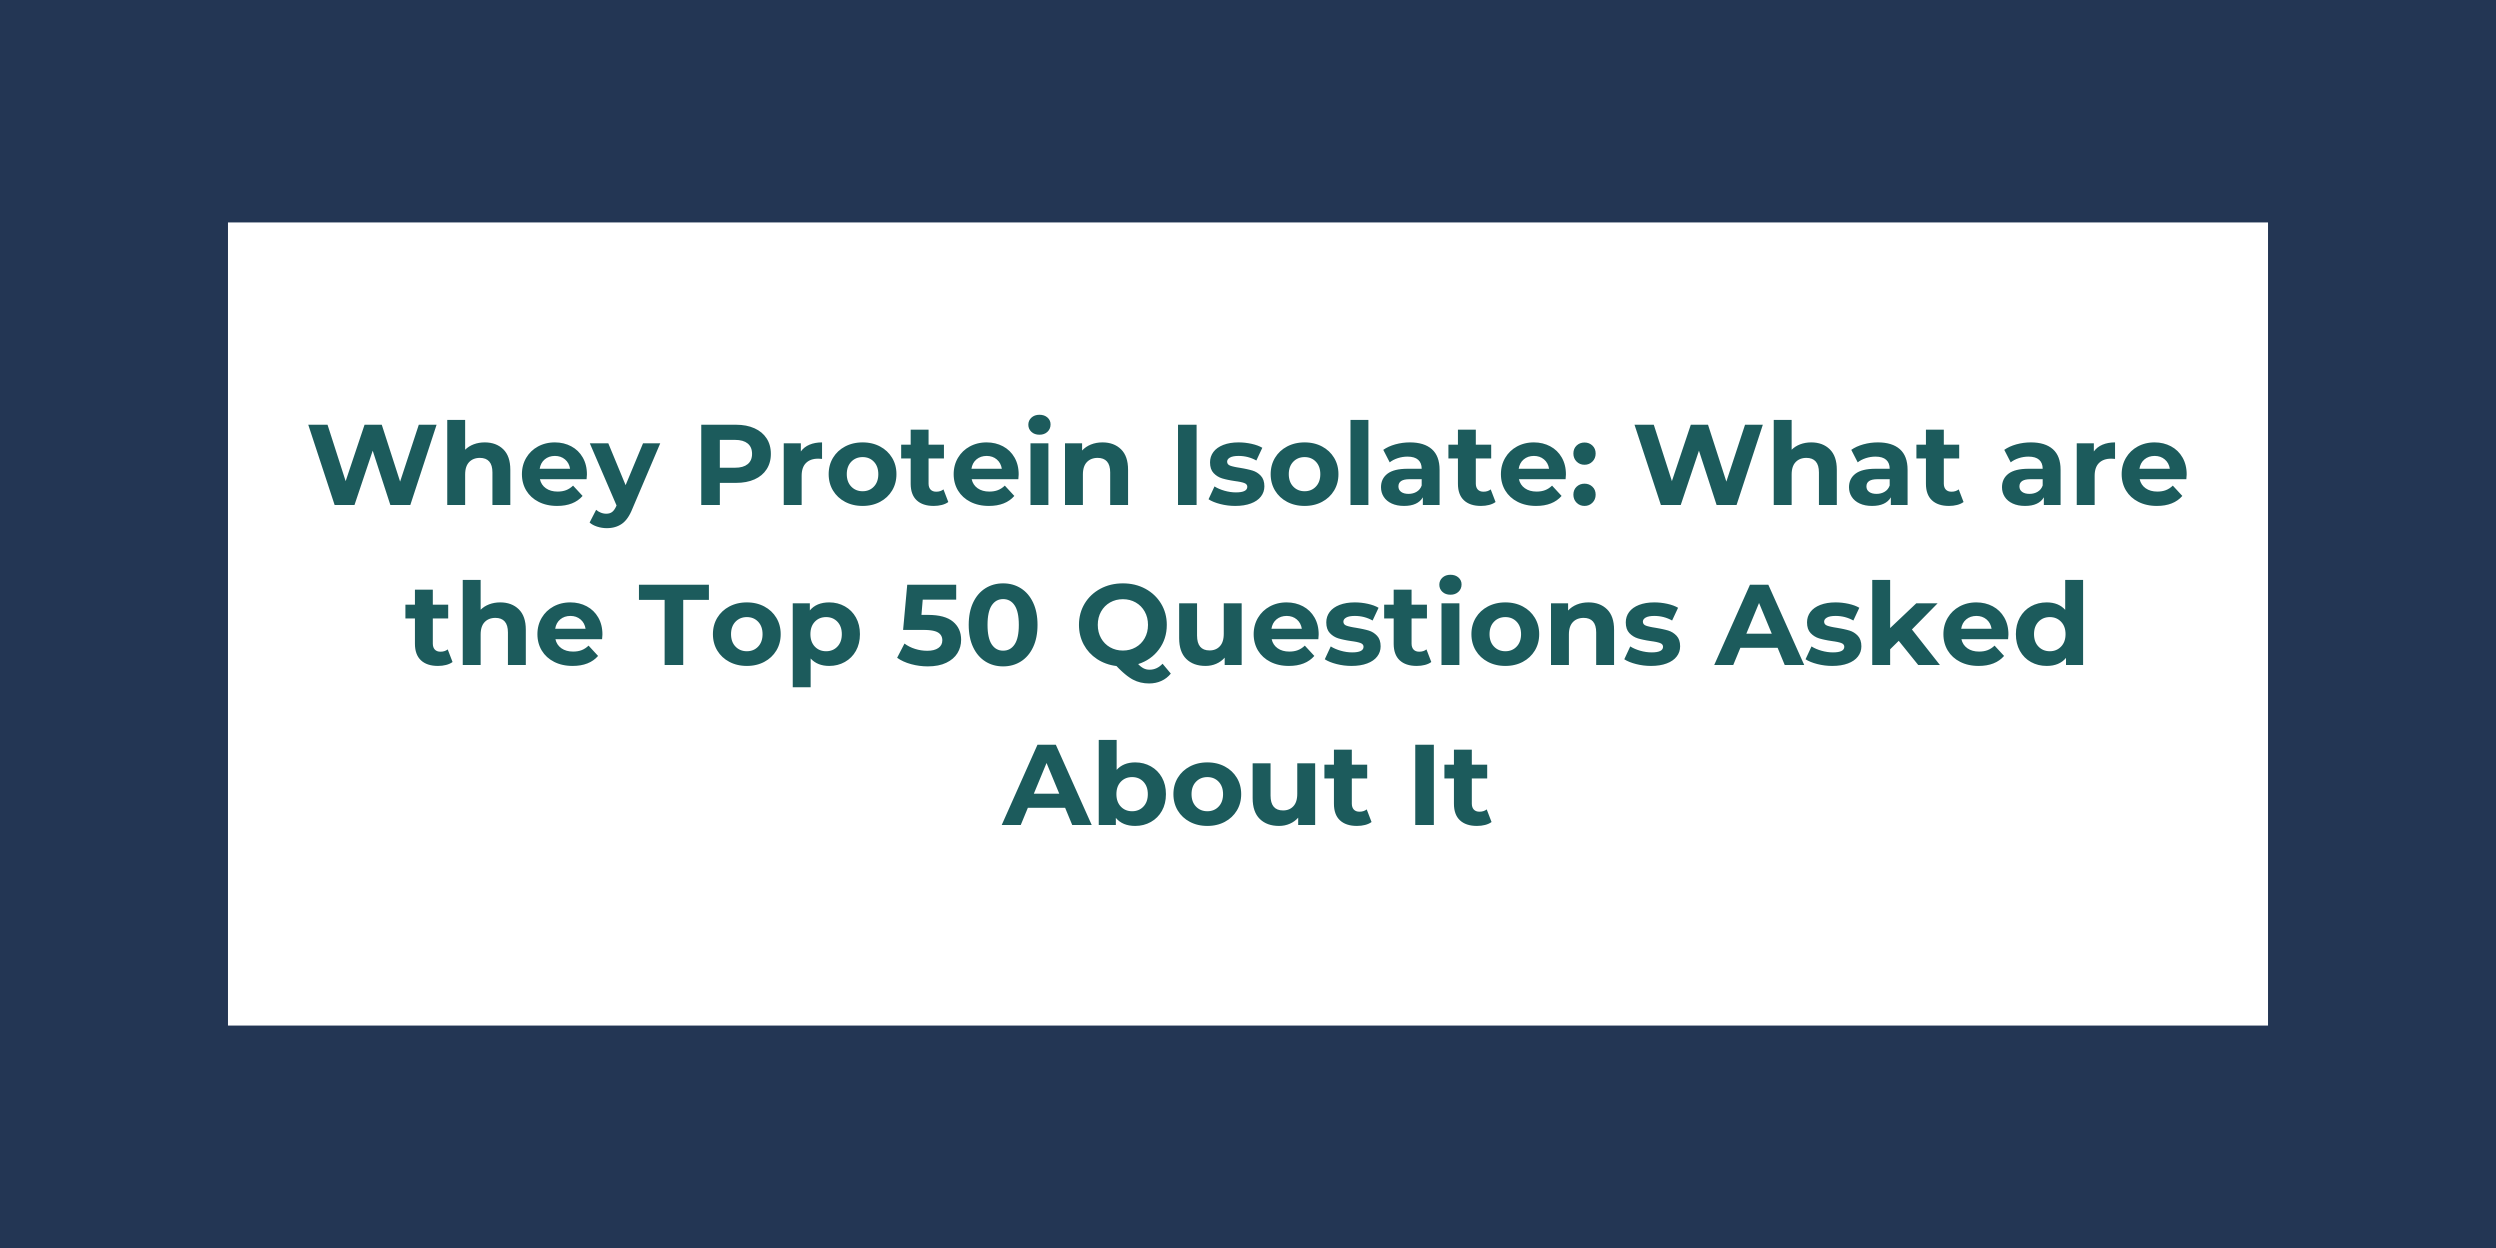 Whey Protein Isolate: What Are the Top 50 Questions Asked About It